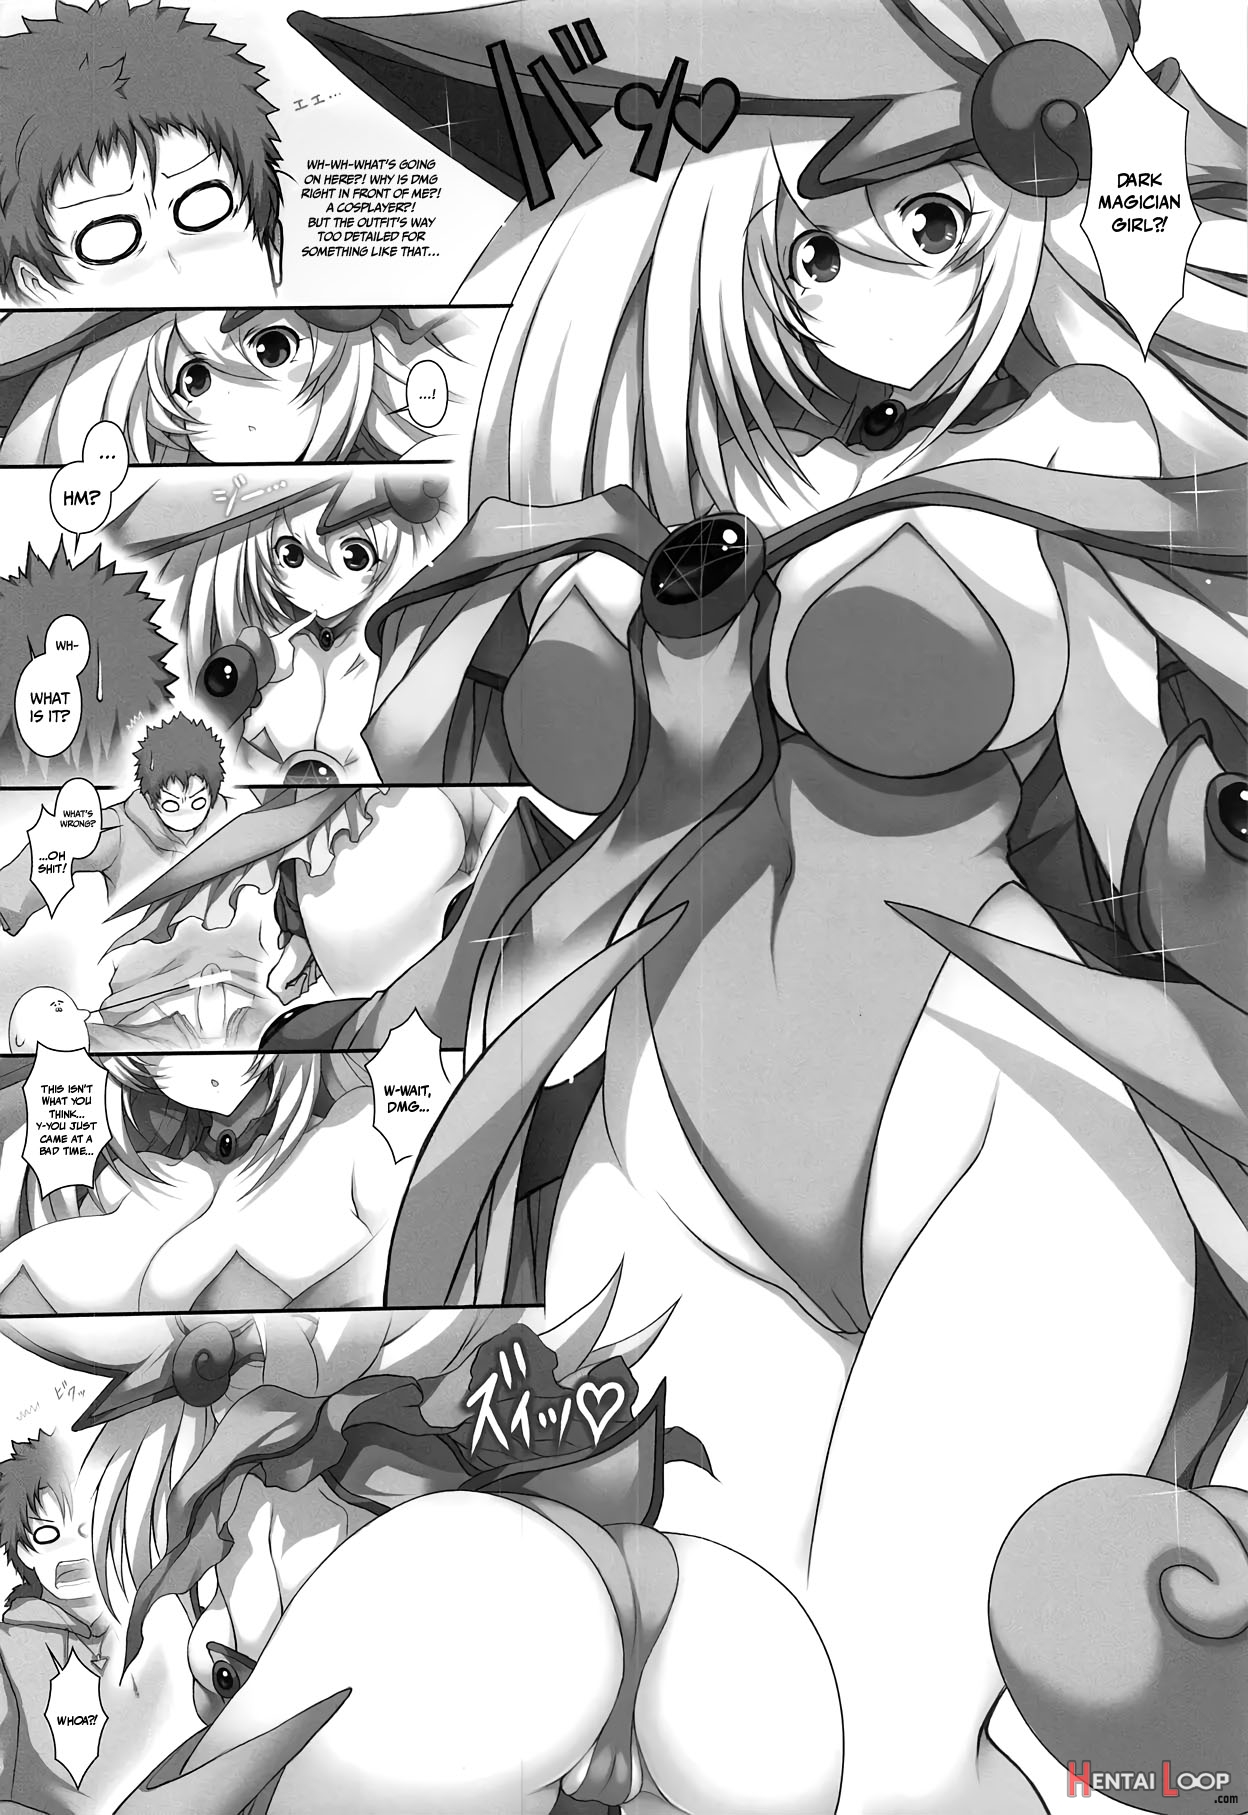 Together With Dark Magician Girl page 3